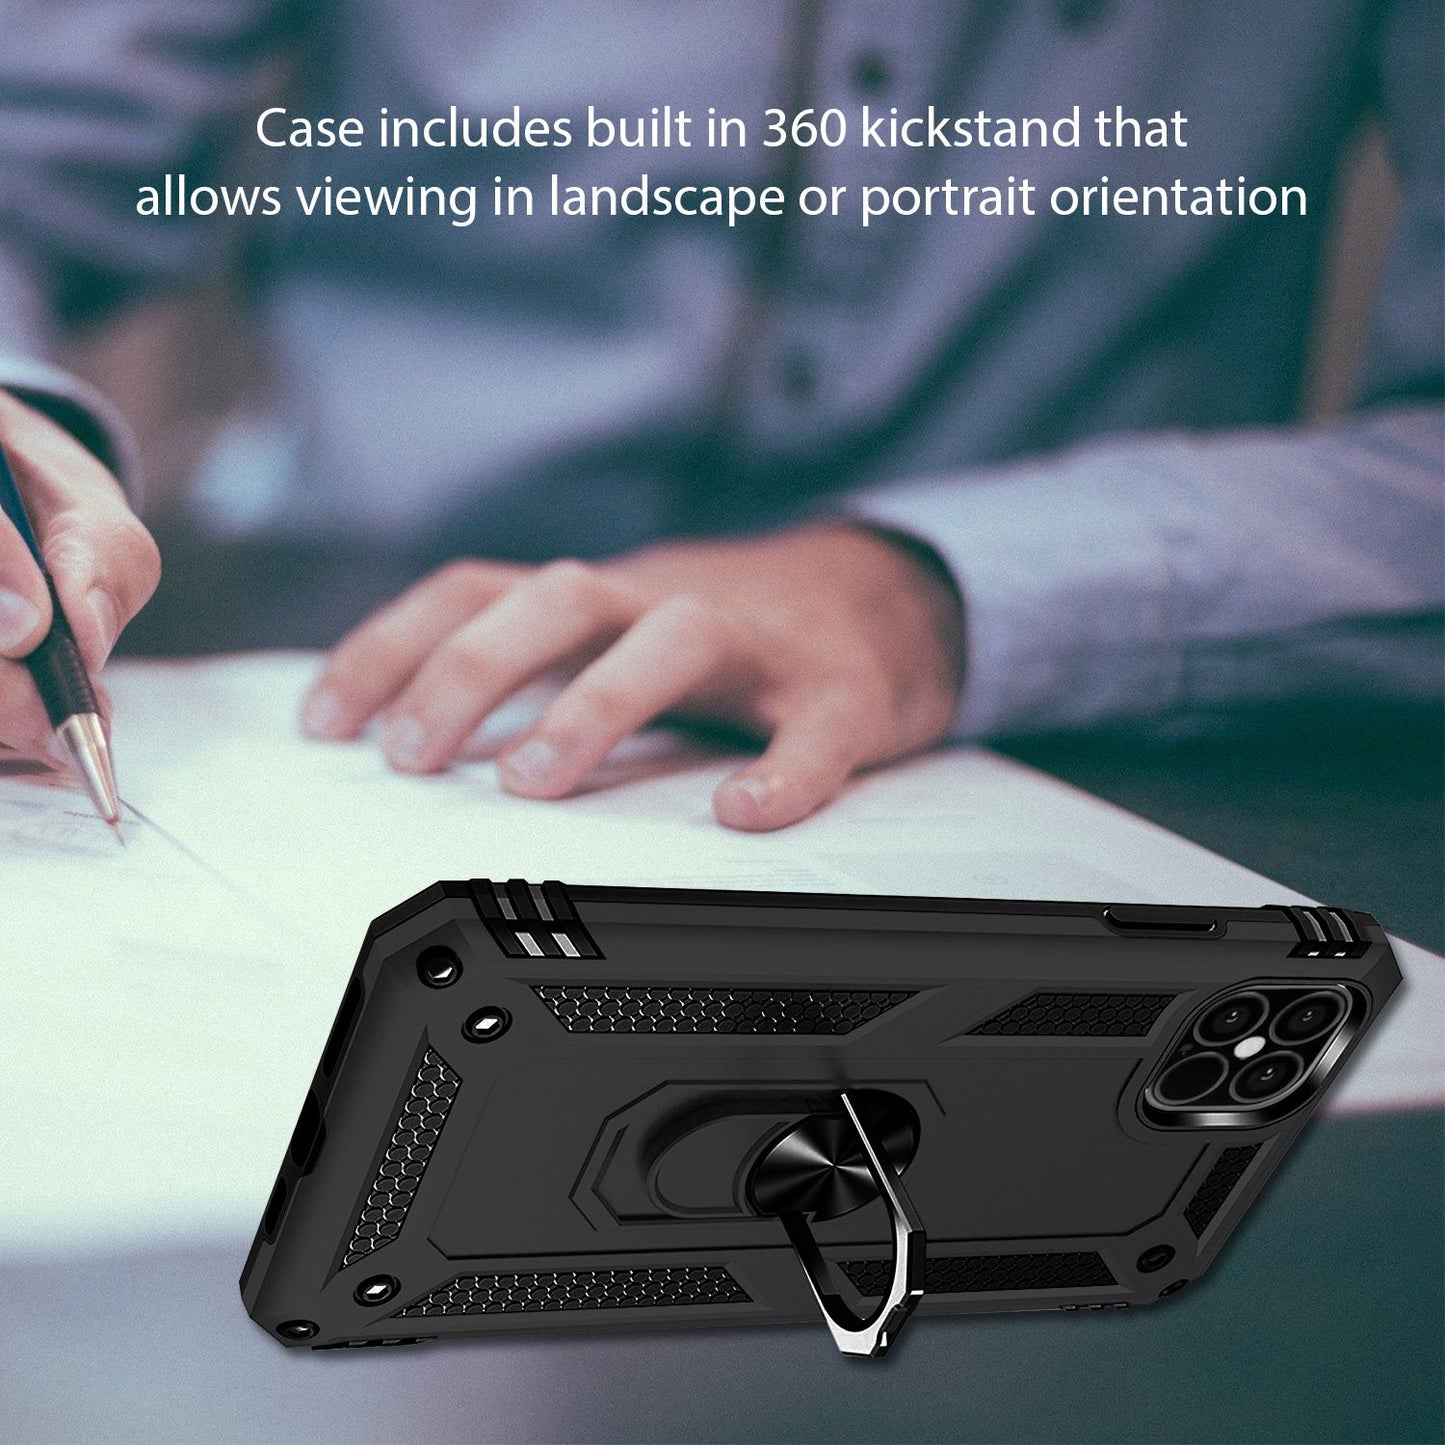 CCIPH12IFBK - 12 Mini Combo Case, Shockproof Case with Built in Ring, Kickstand and Magnet for Car Mounts Compatible to Apple iPhone 12 Mini